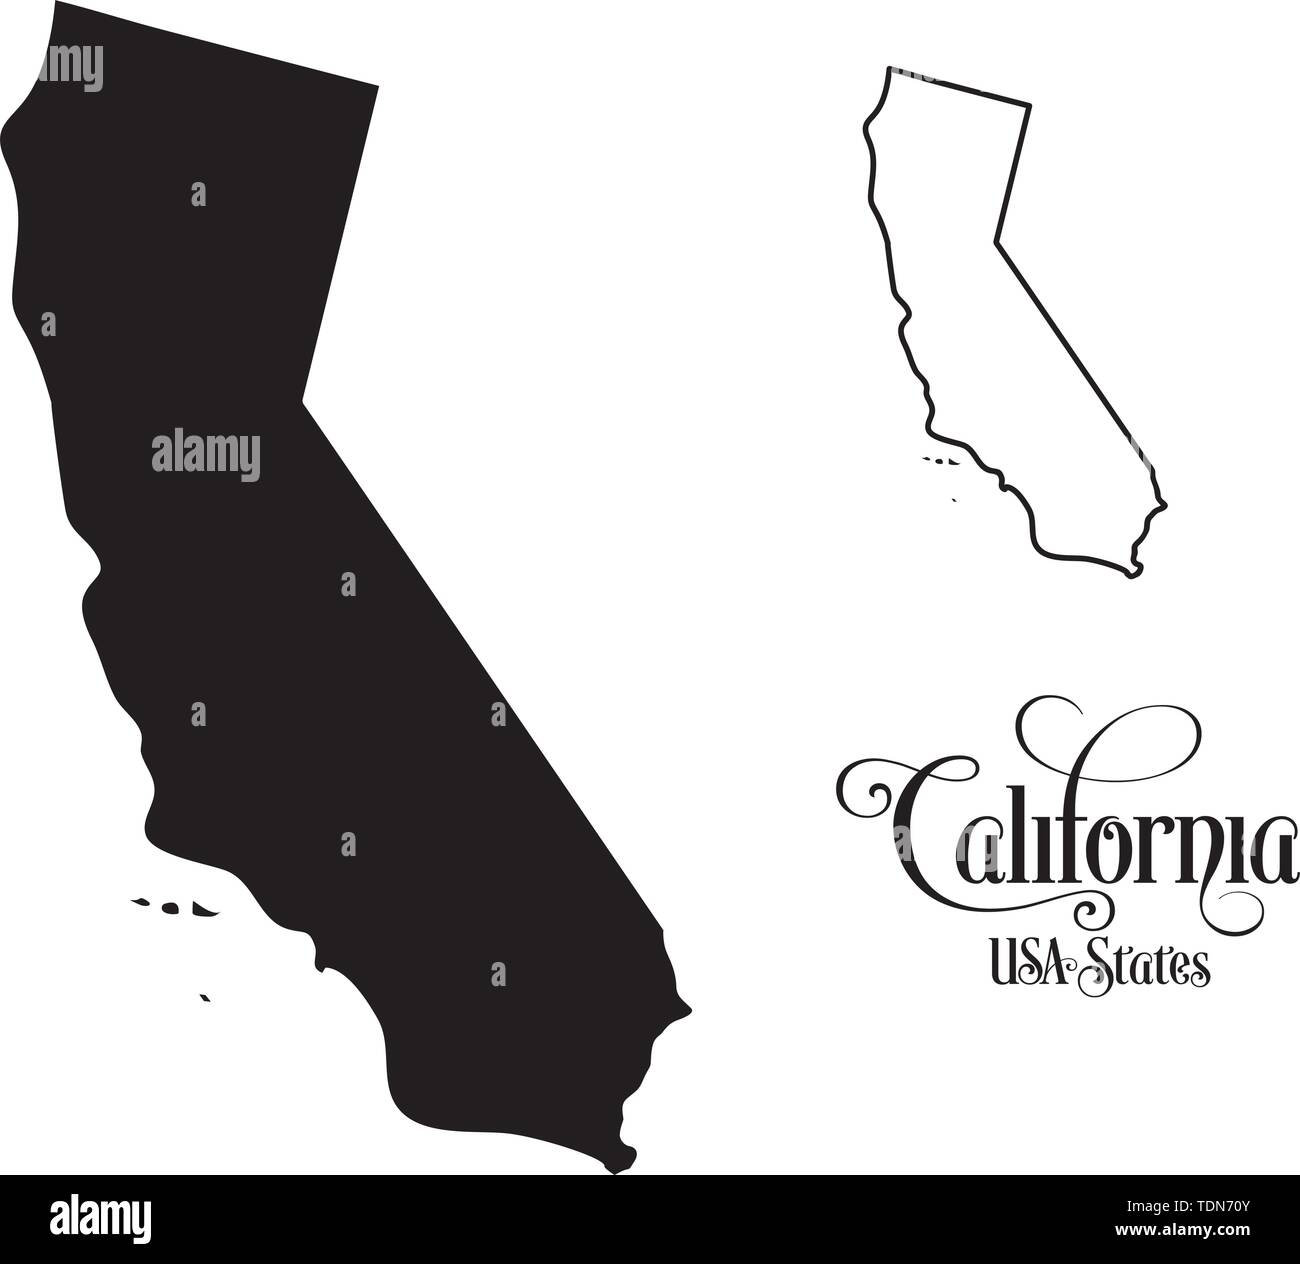 Map of The United States of America (USA) State of California - Illustration on White Background. Stock Vector